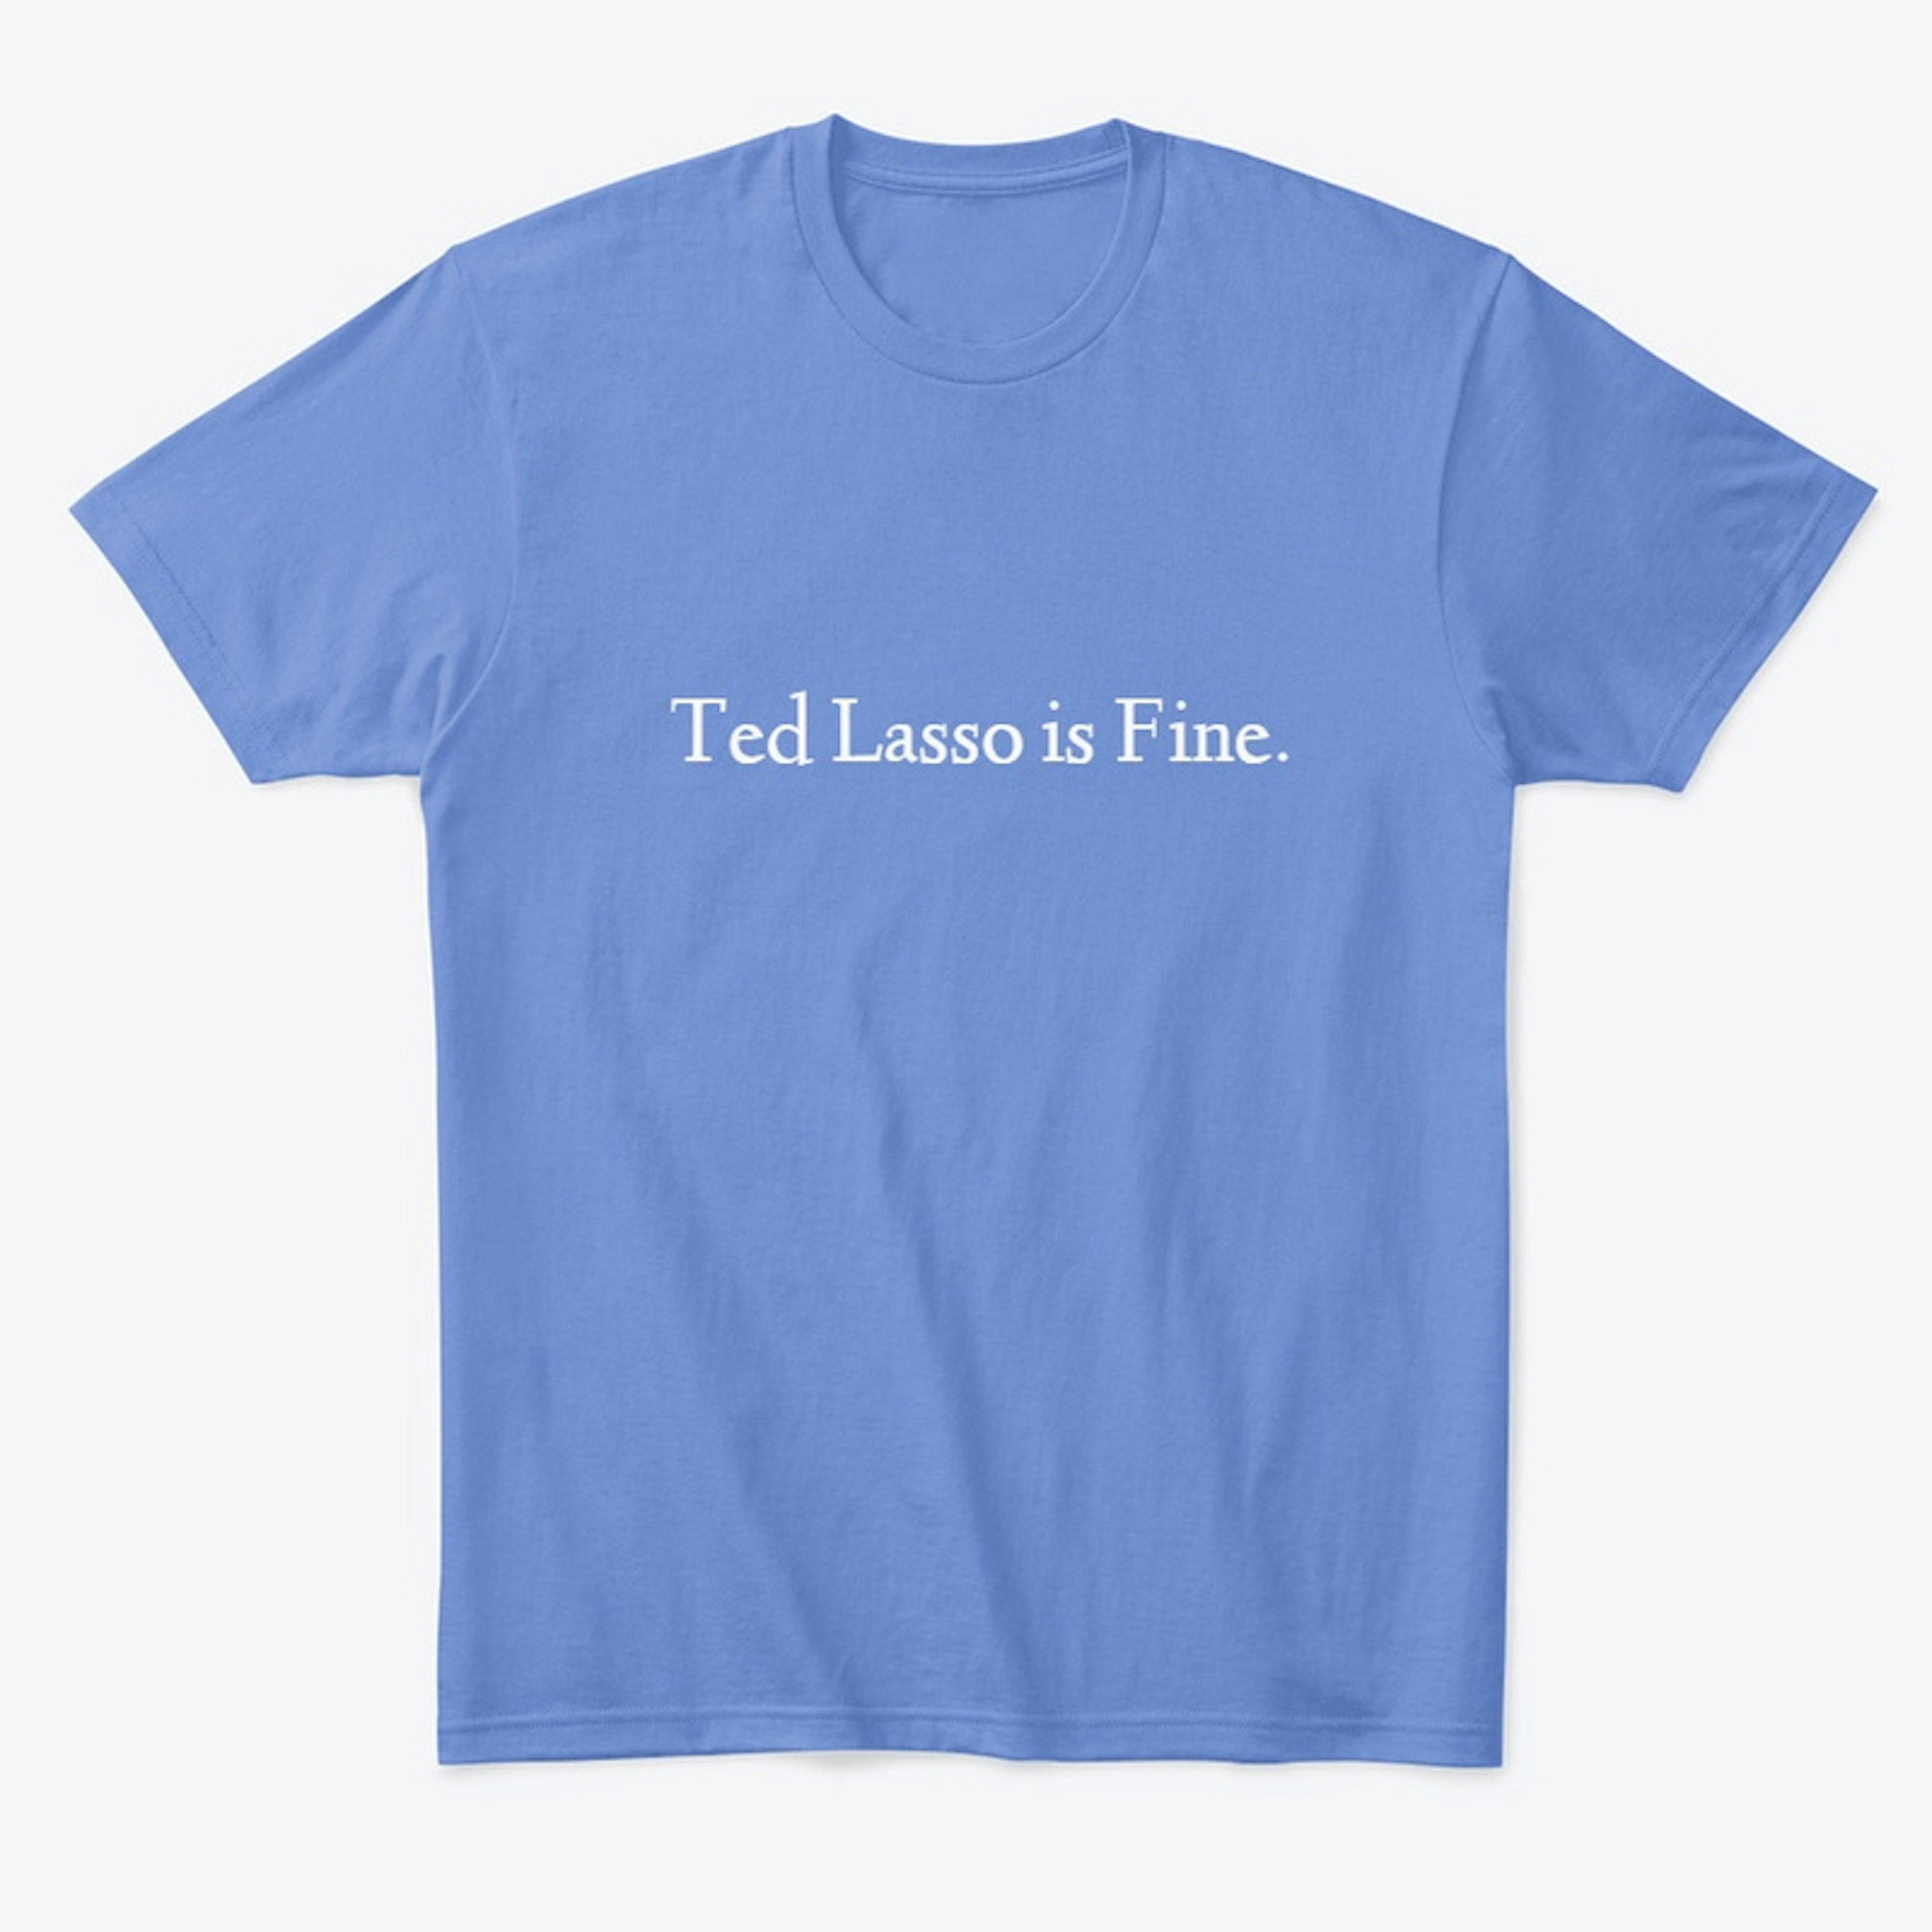 Ted Lasso is Fine t-shirt